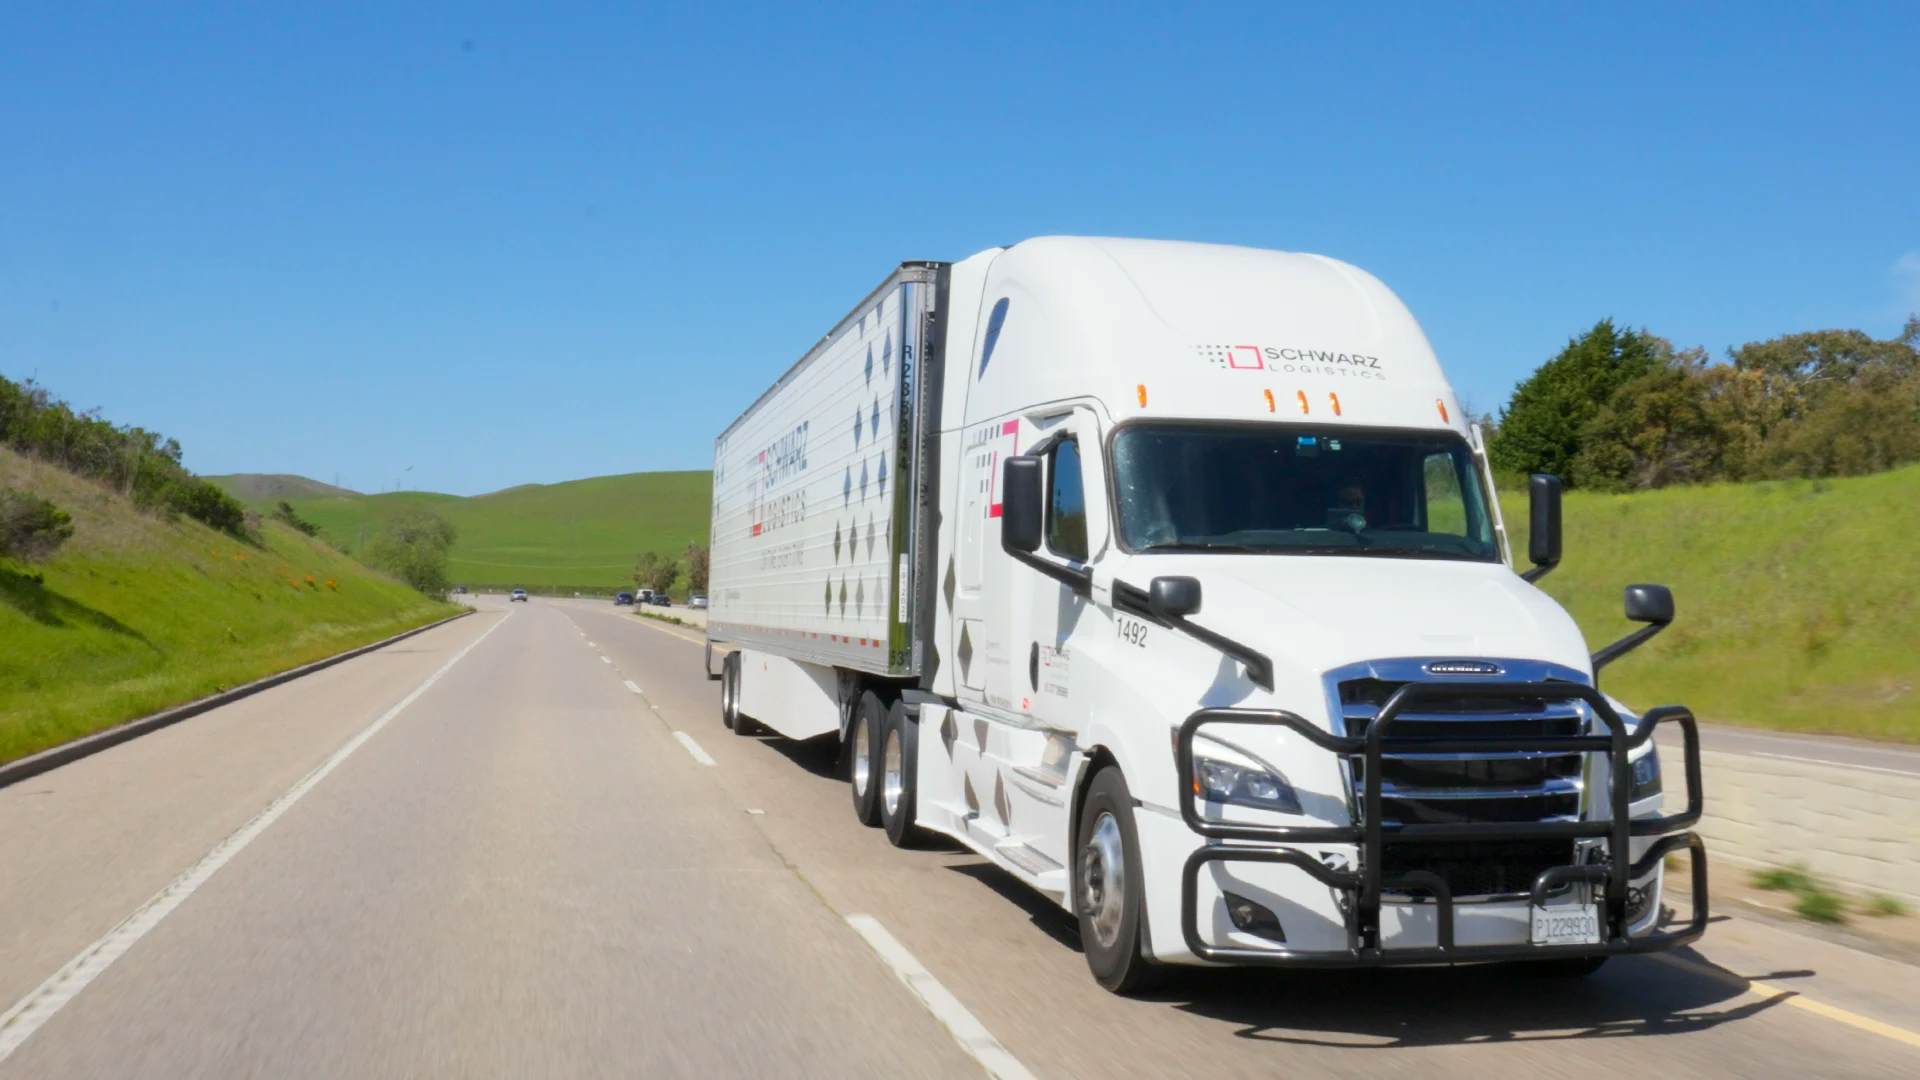 A white Freightliner Cascadia semi truck hauling a trailer travels down a straight, multi-lane highway.